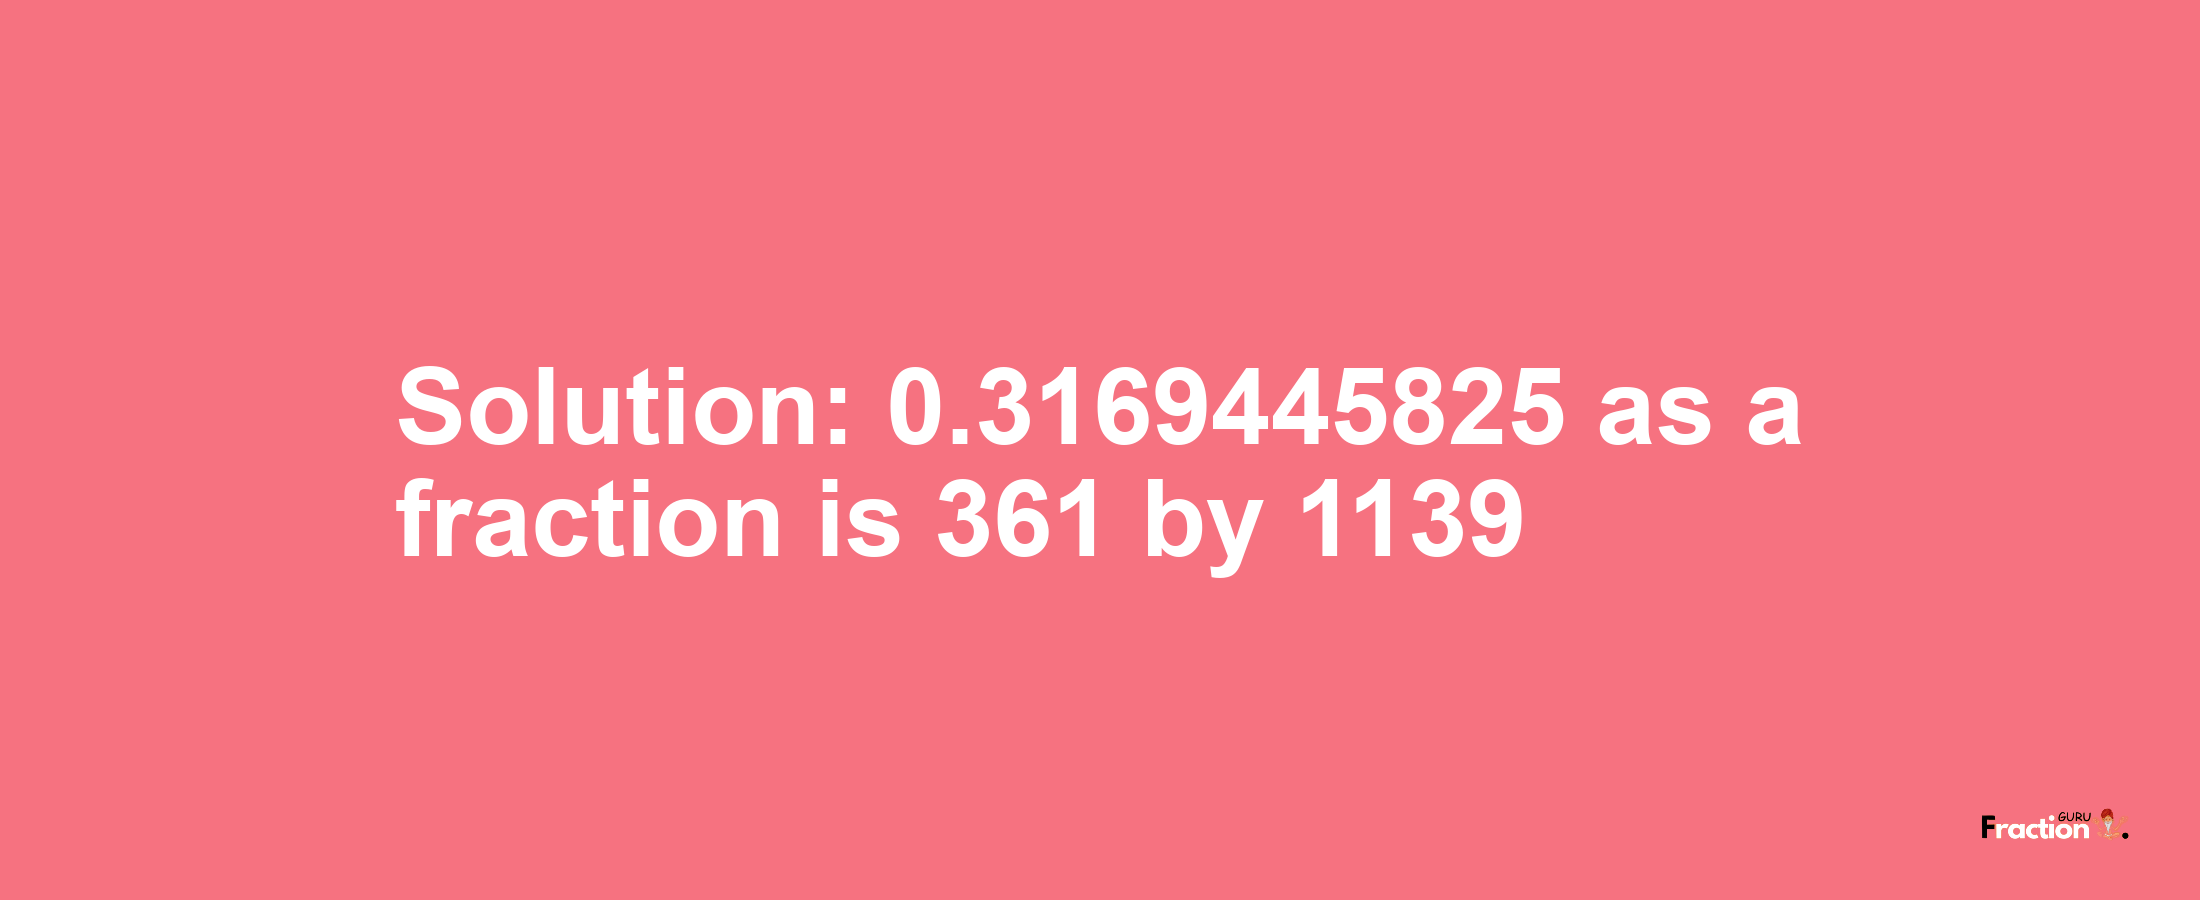 Solution:0.3169445825 as a fraction is 361/1139